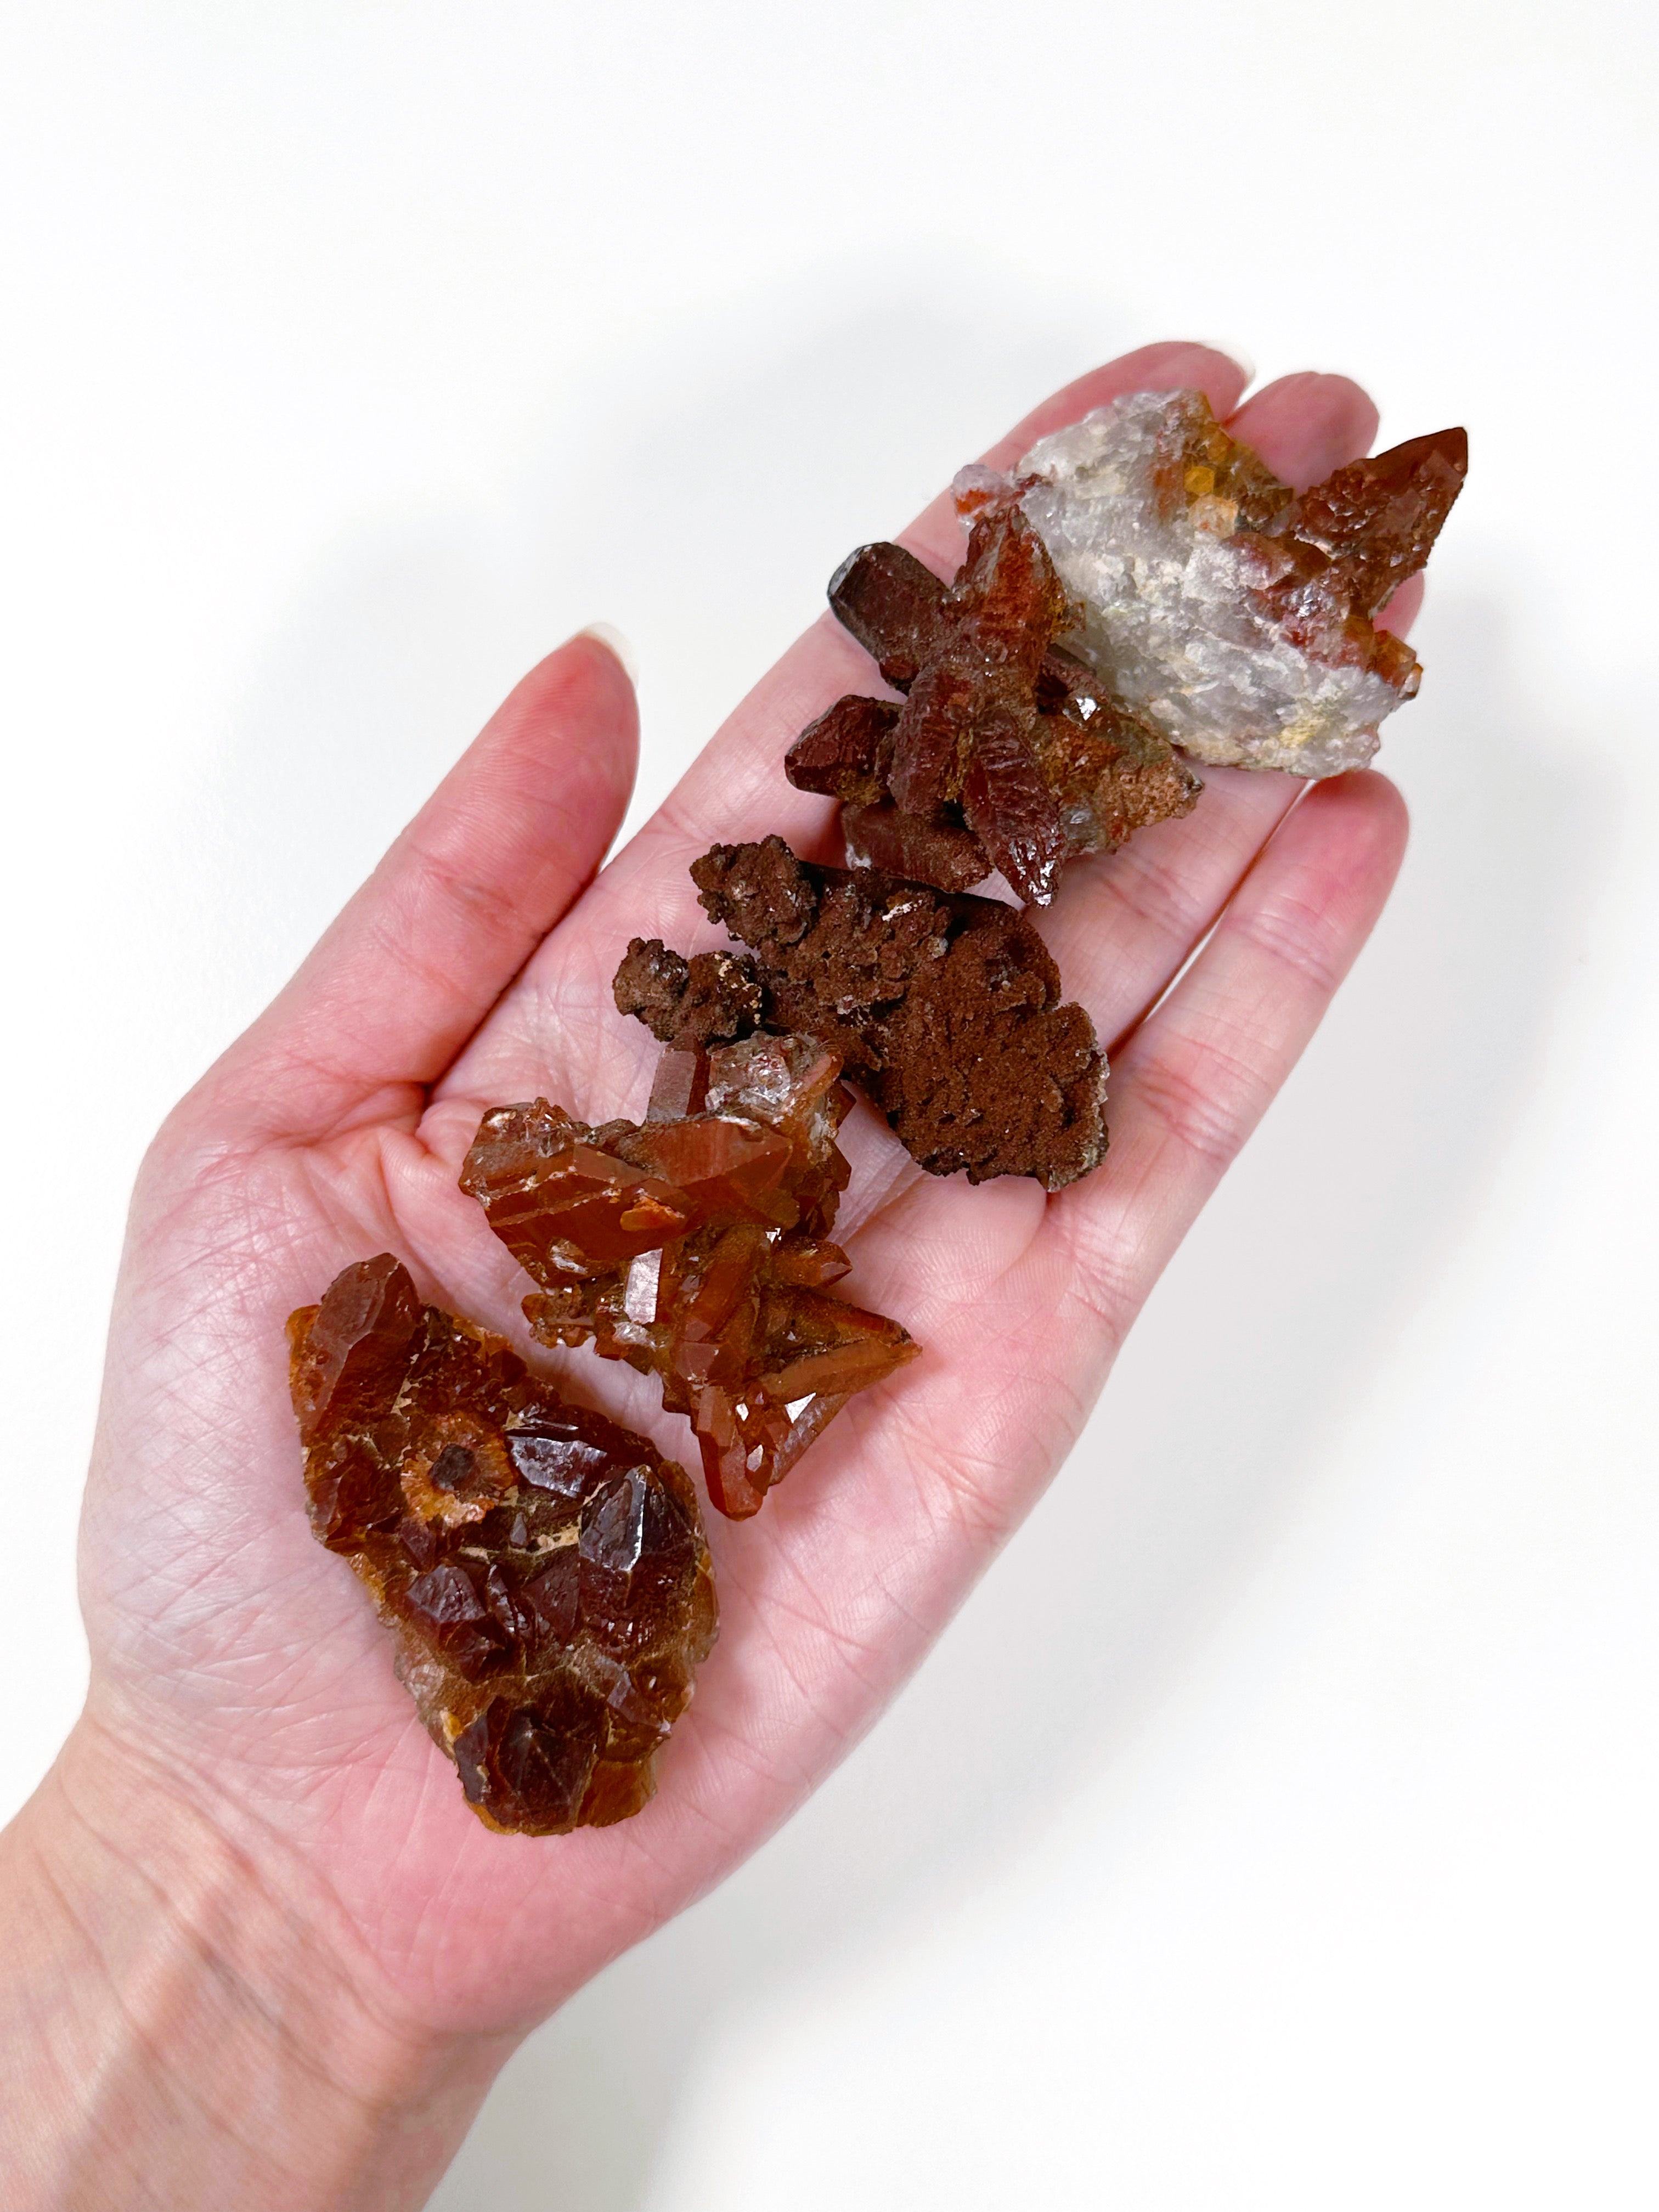 'OXBLOOD' HEMATITE IN QUARTZ CLUSTER - hematite, hematite in quartz, hematoid quartz, oxblood hematite in quartz, quartz cluster, raw crystal, raw point, raw stone, recently added, rough crystal, Rough Stone - The Mineral Maven